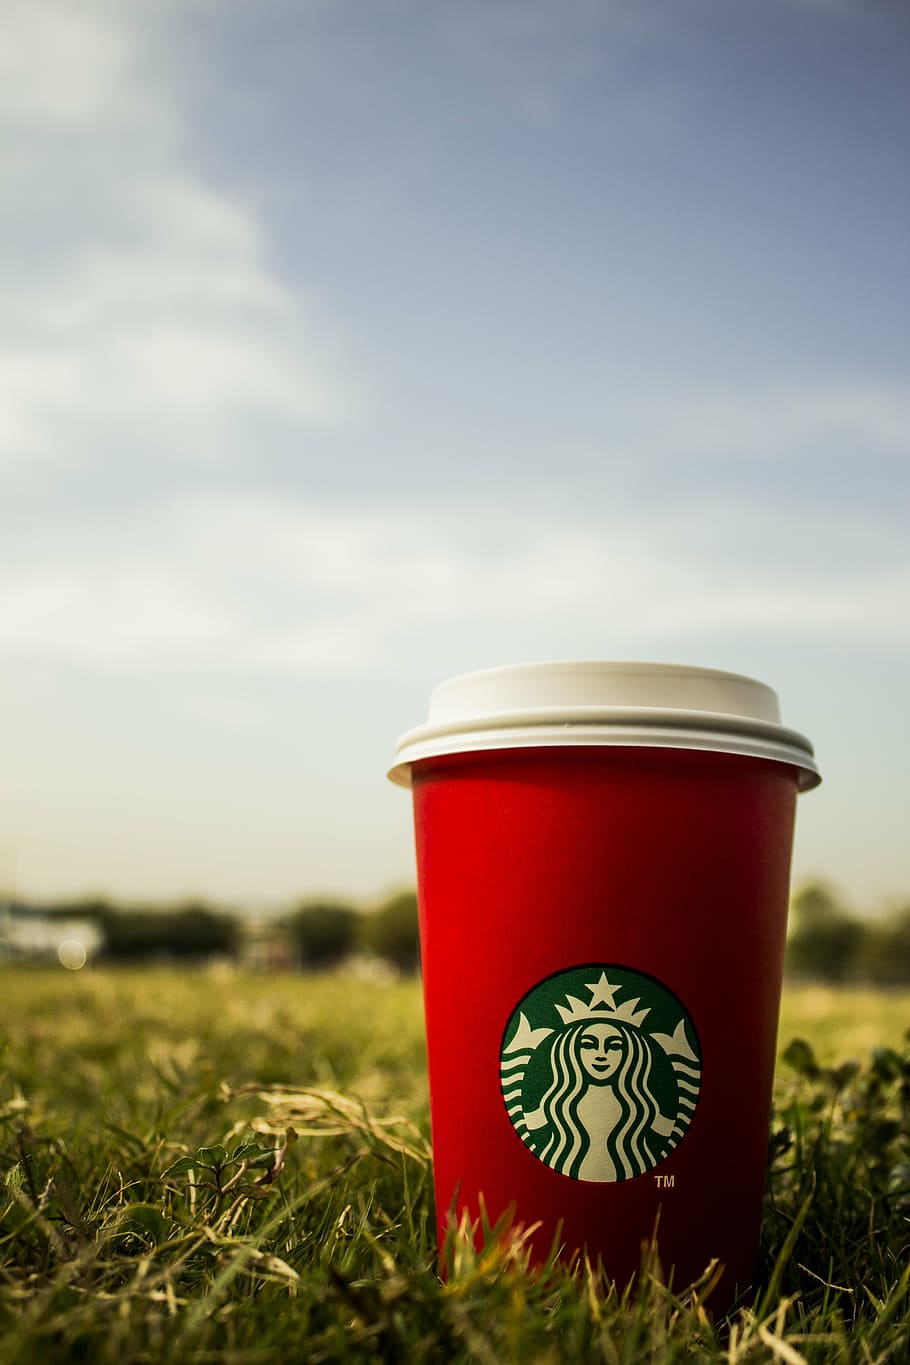 Starbucks cup on grass, coffee, lawn, christmas, red, sky, logo